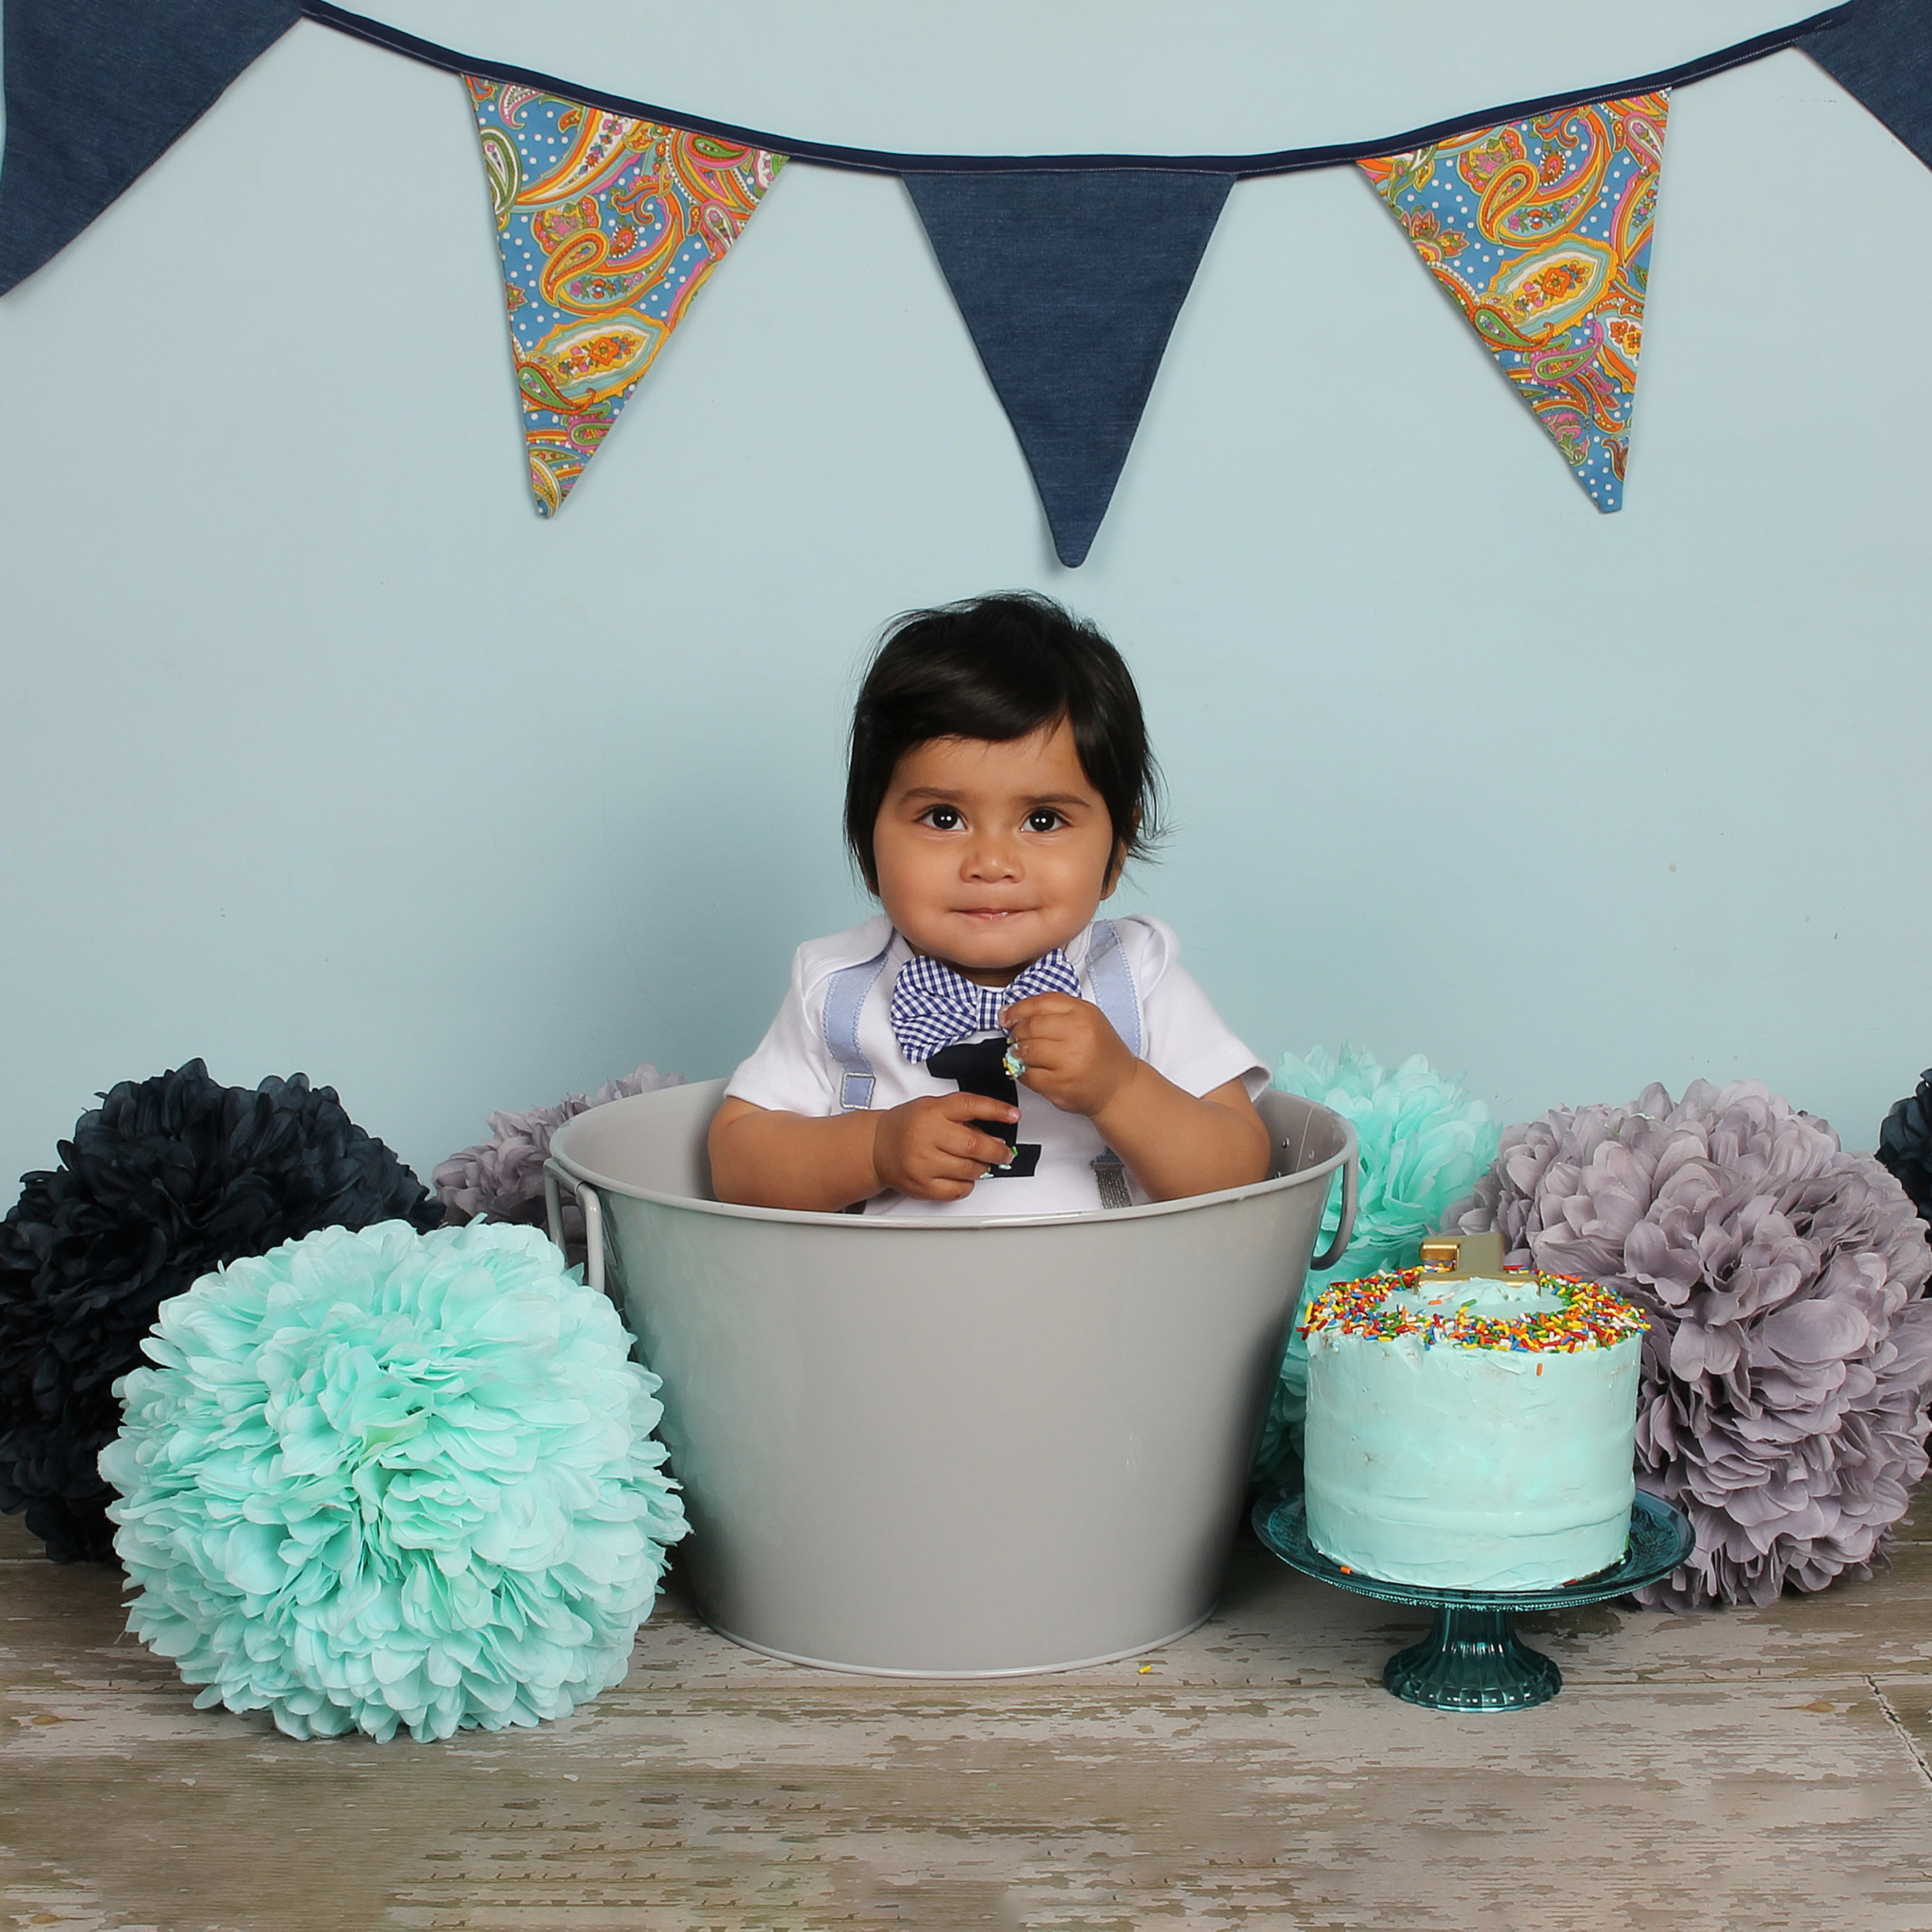 Banner w/Navy, Teal & Grey Poofs in Bucket On Blue